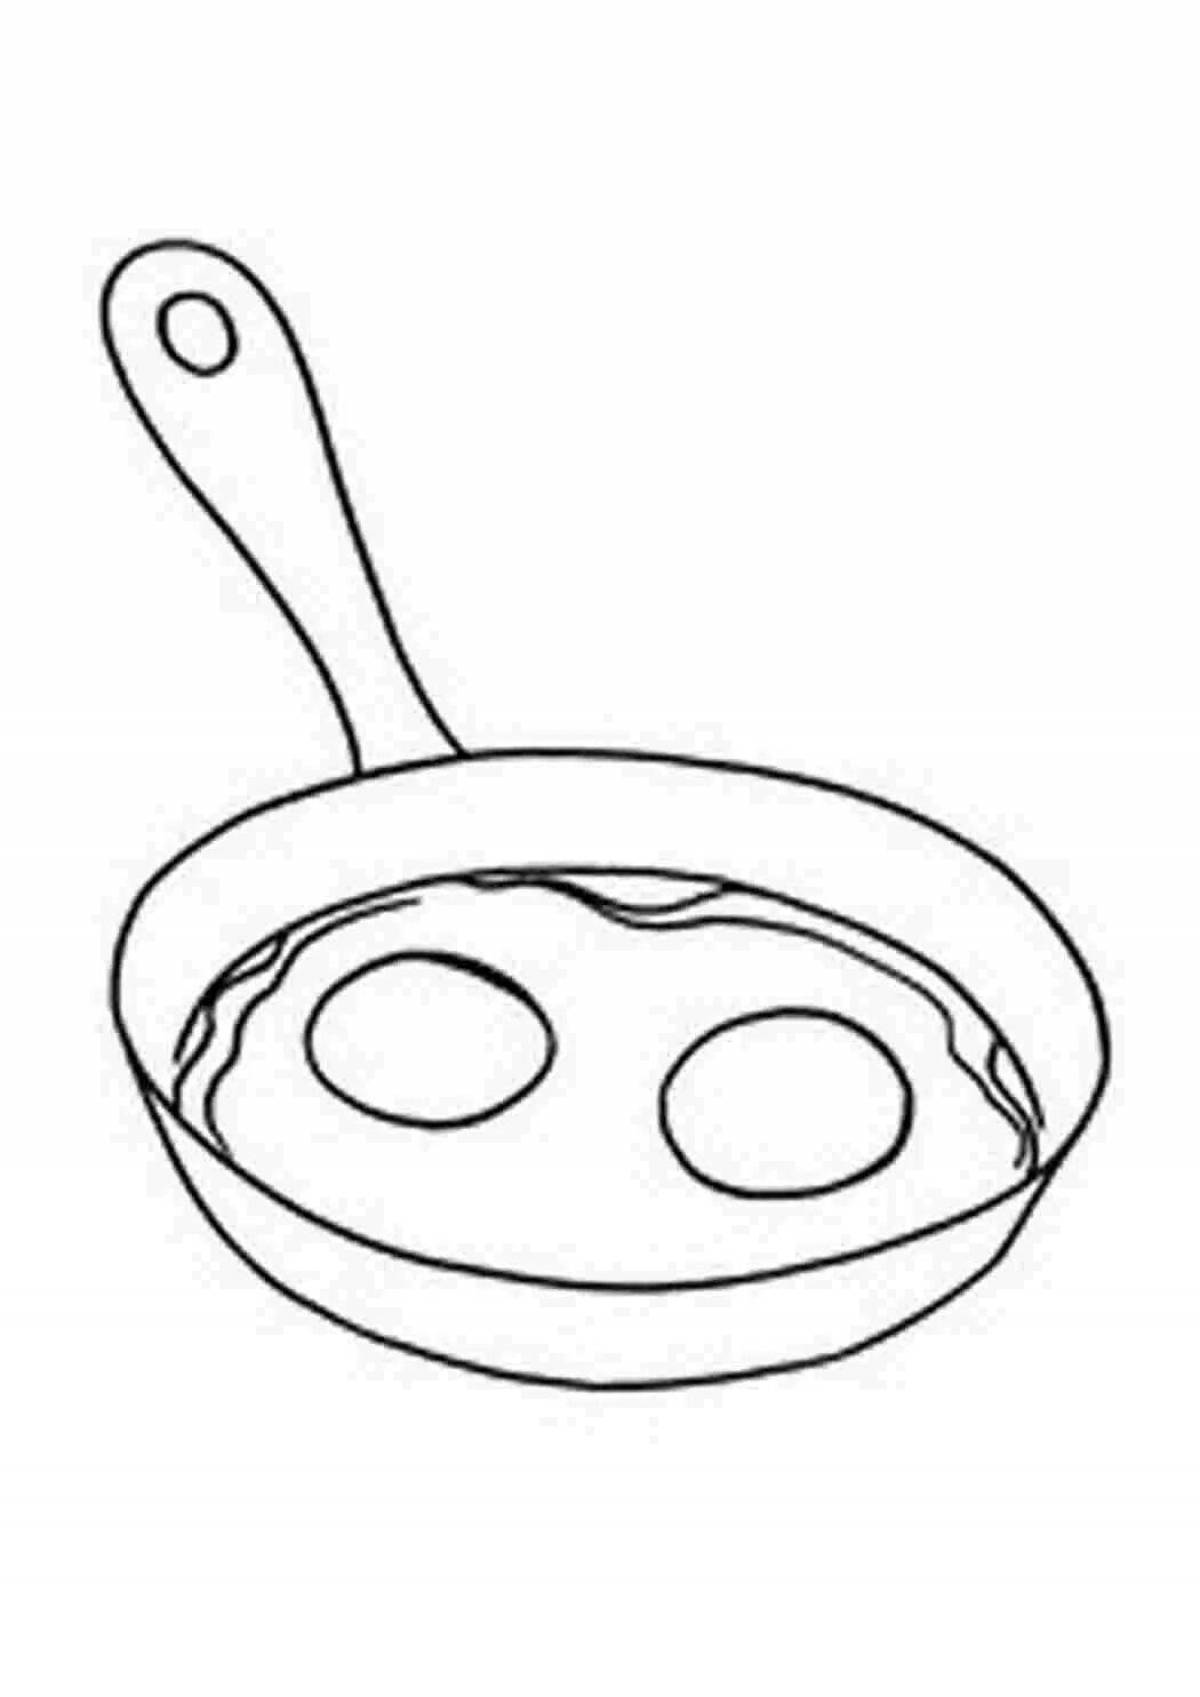 Coloring page joyful omelet